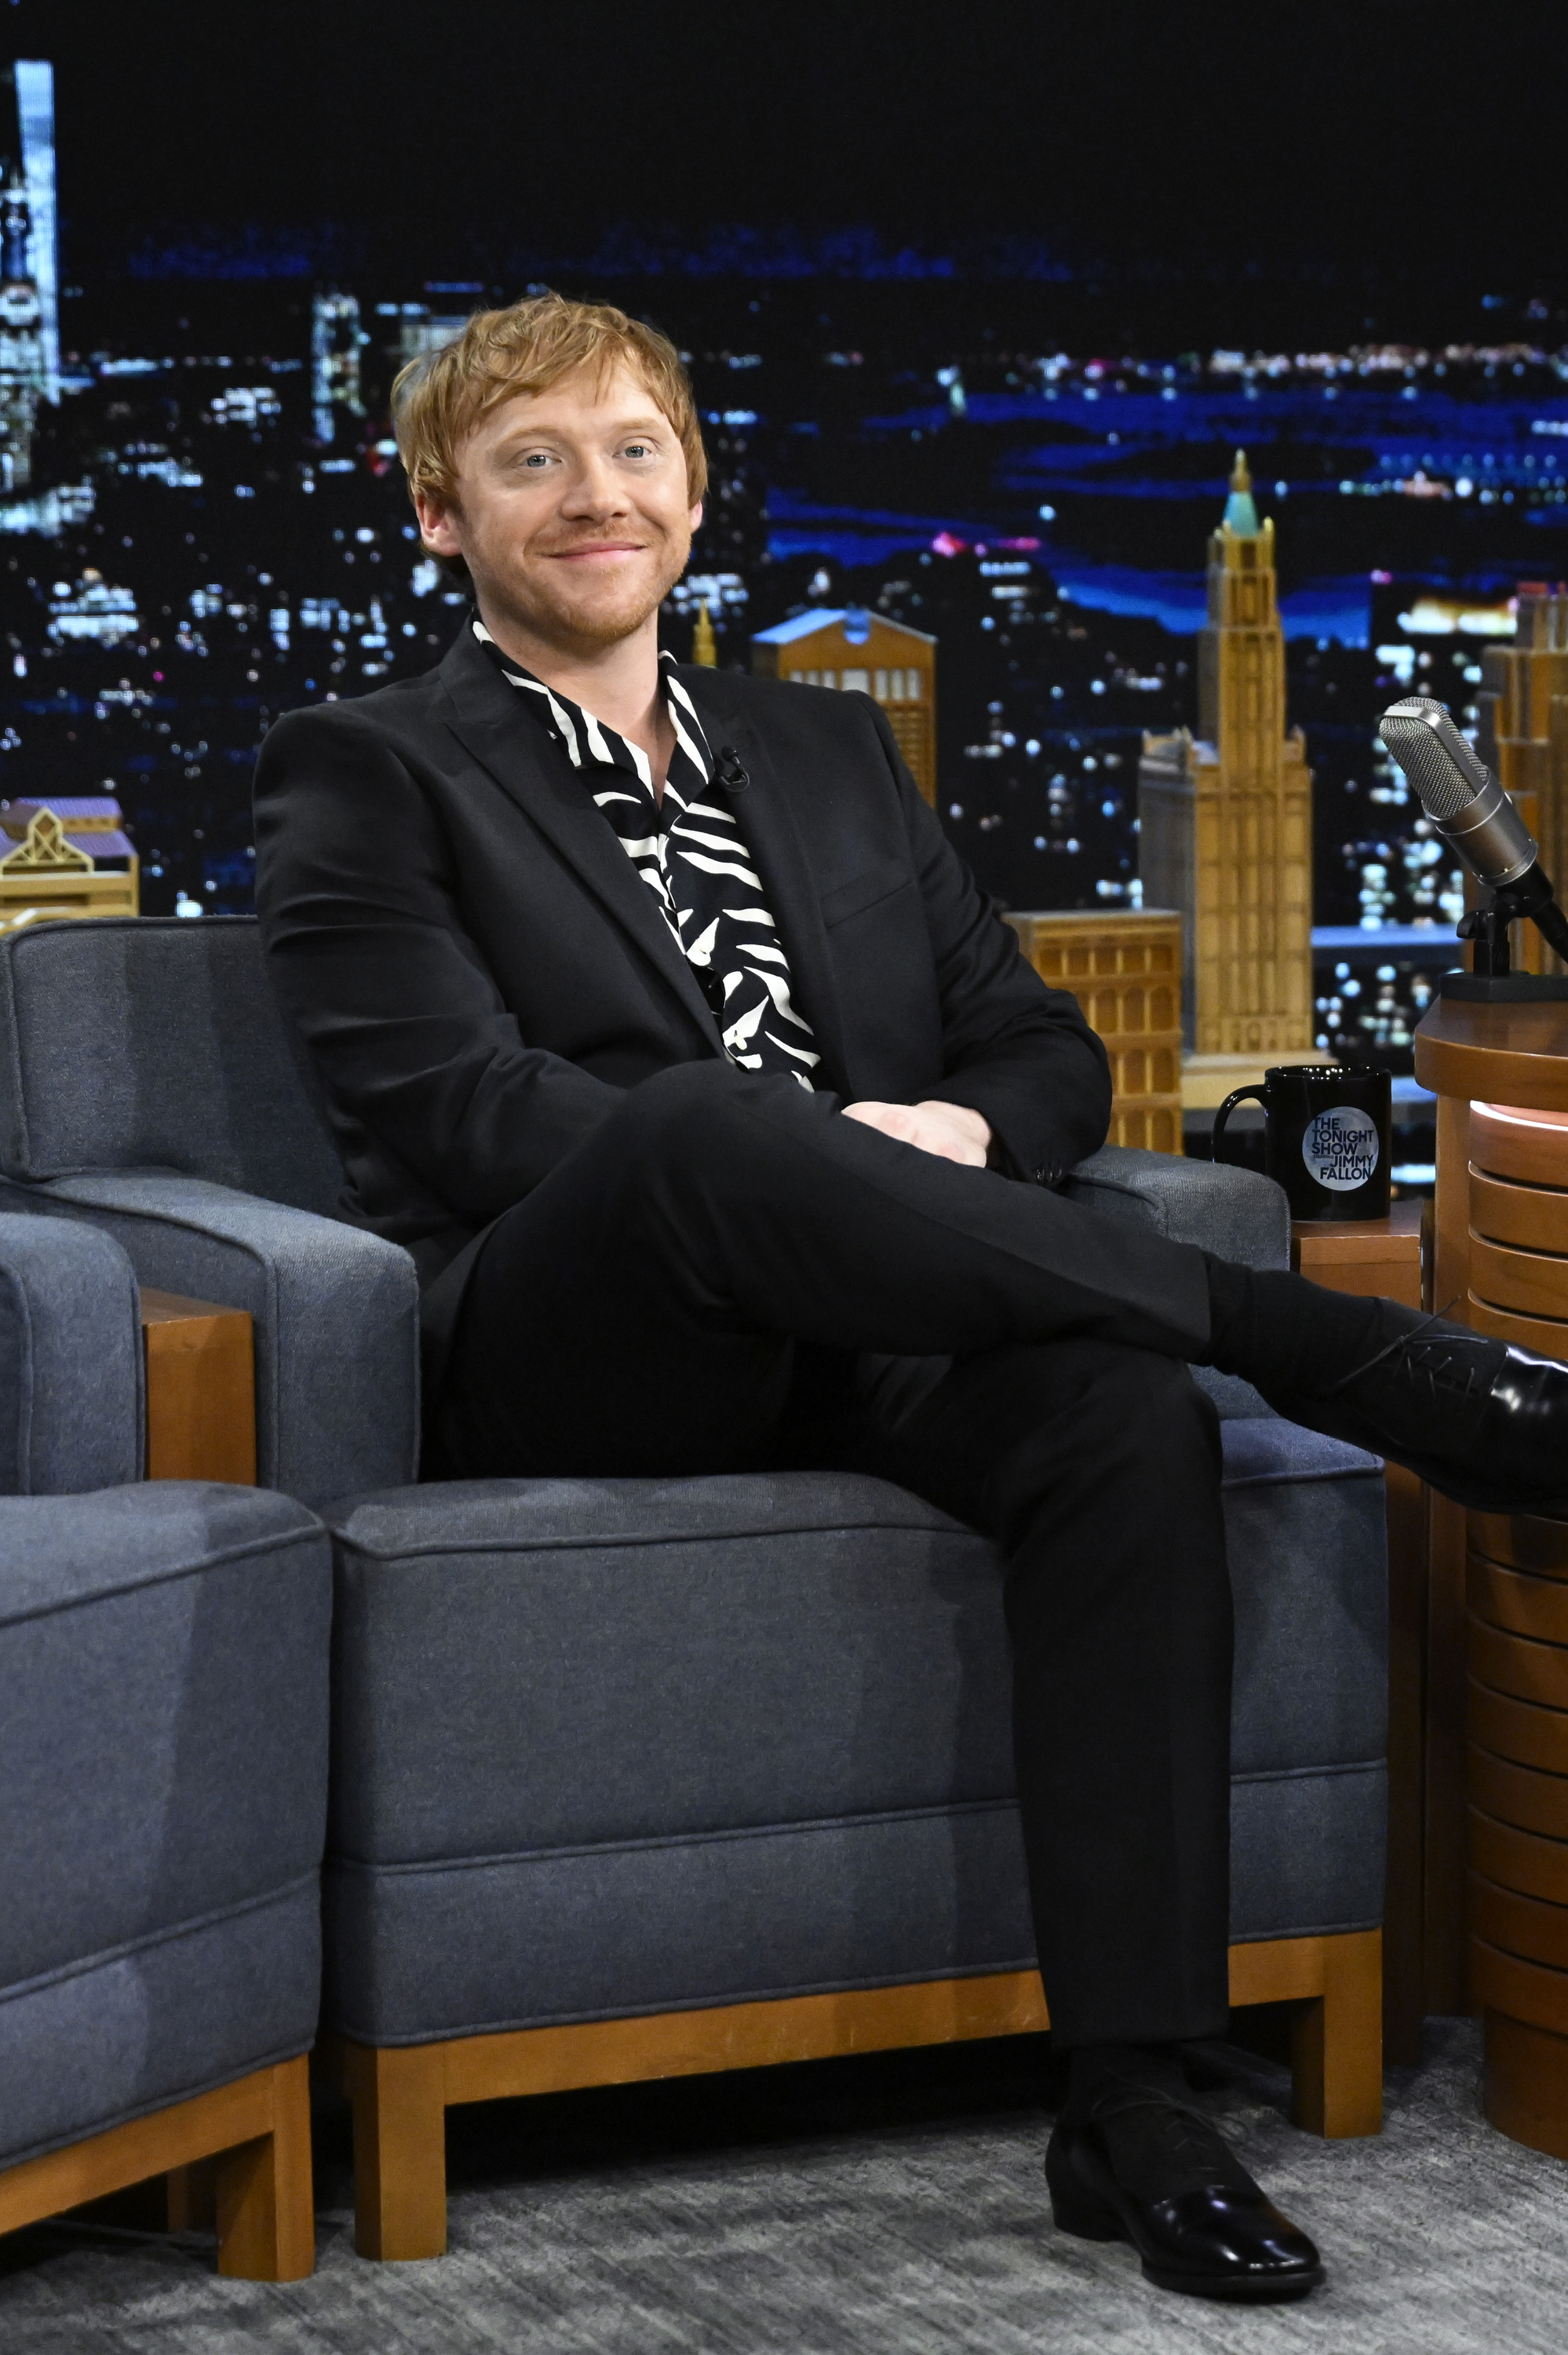 Rupert Grint on an episode of "The Tonight Show Starring Jimmy Fallon" on March 9, 2022 | Source: Getty Images